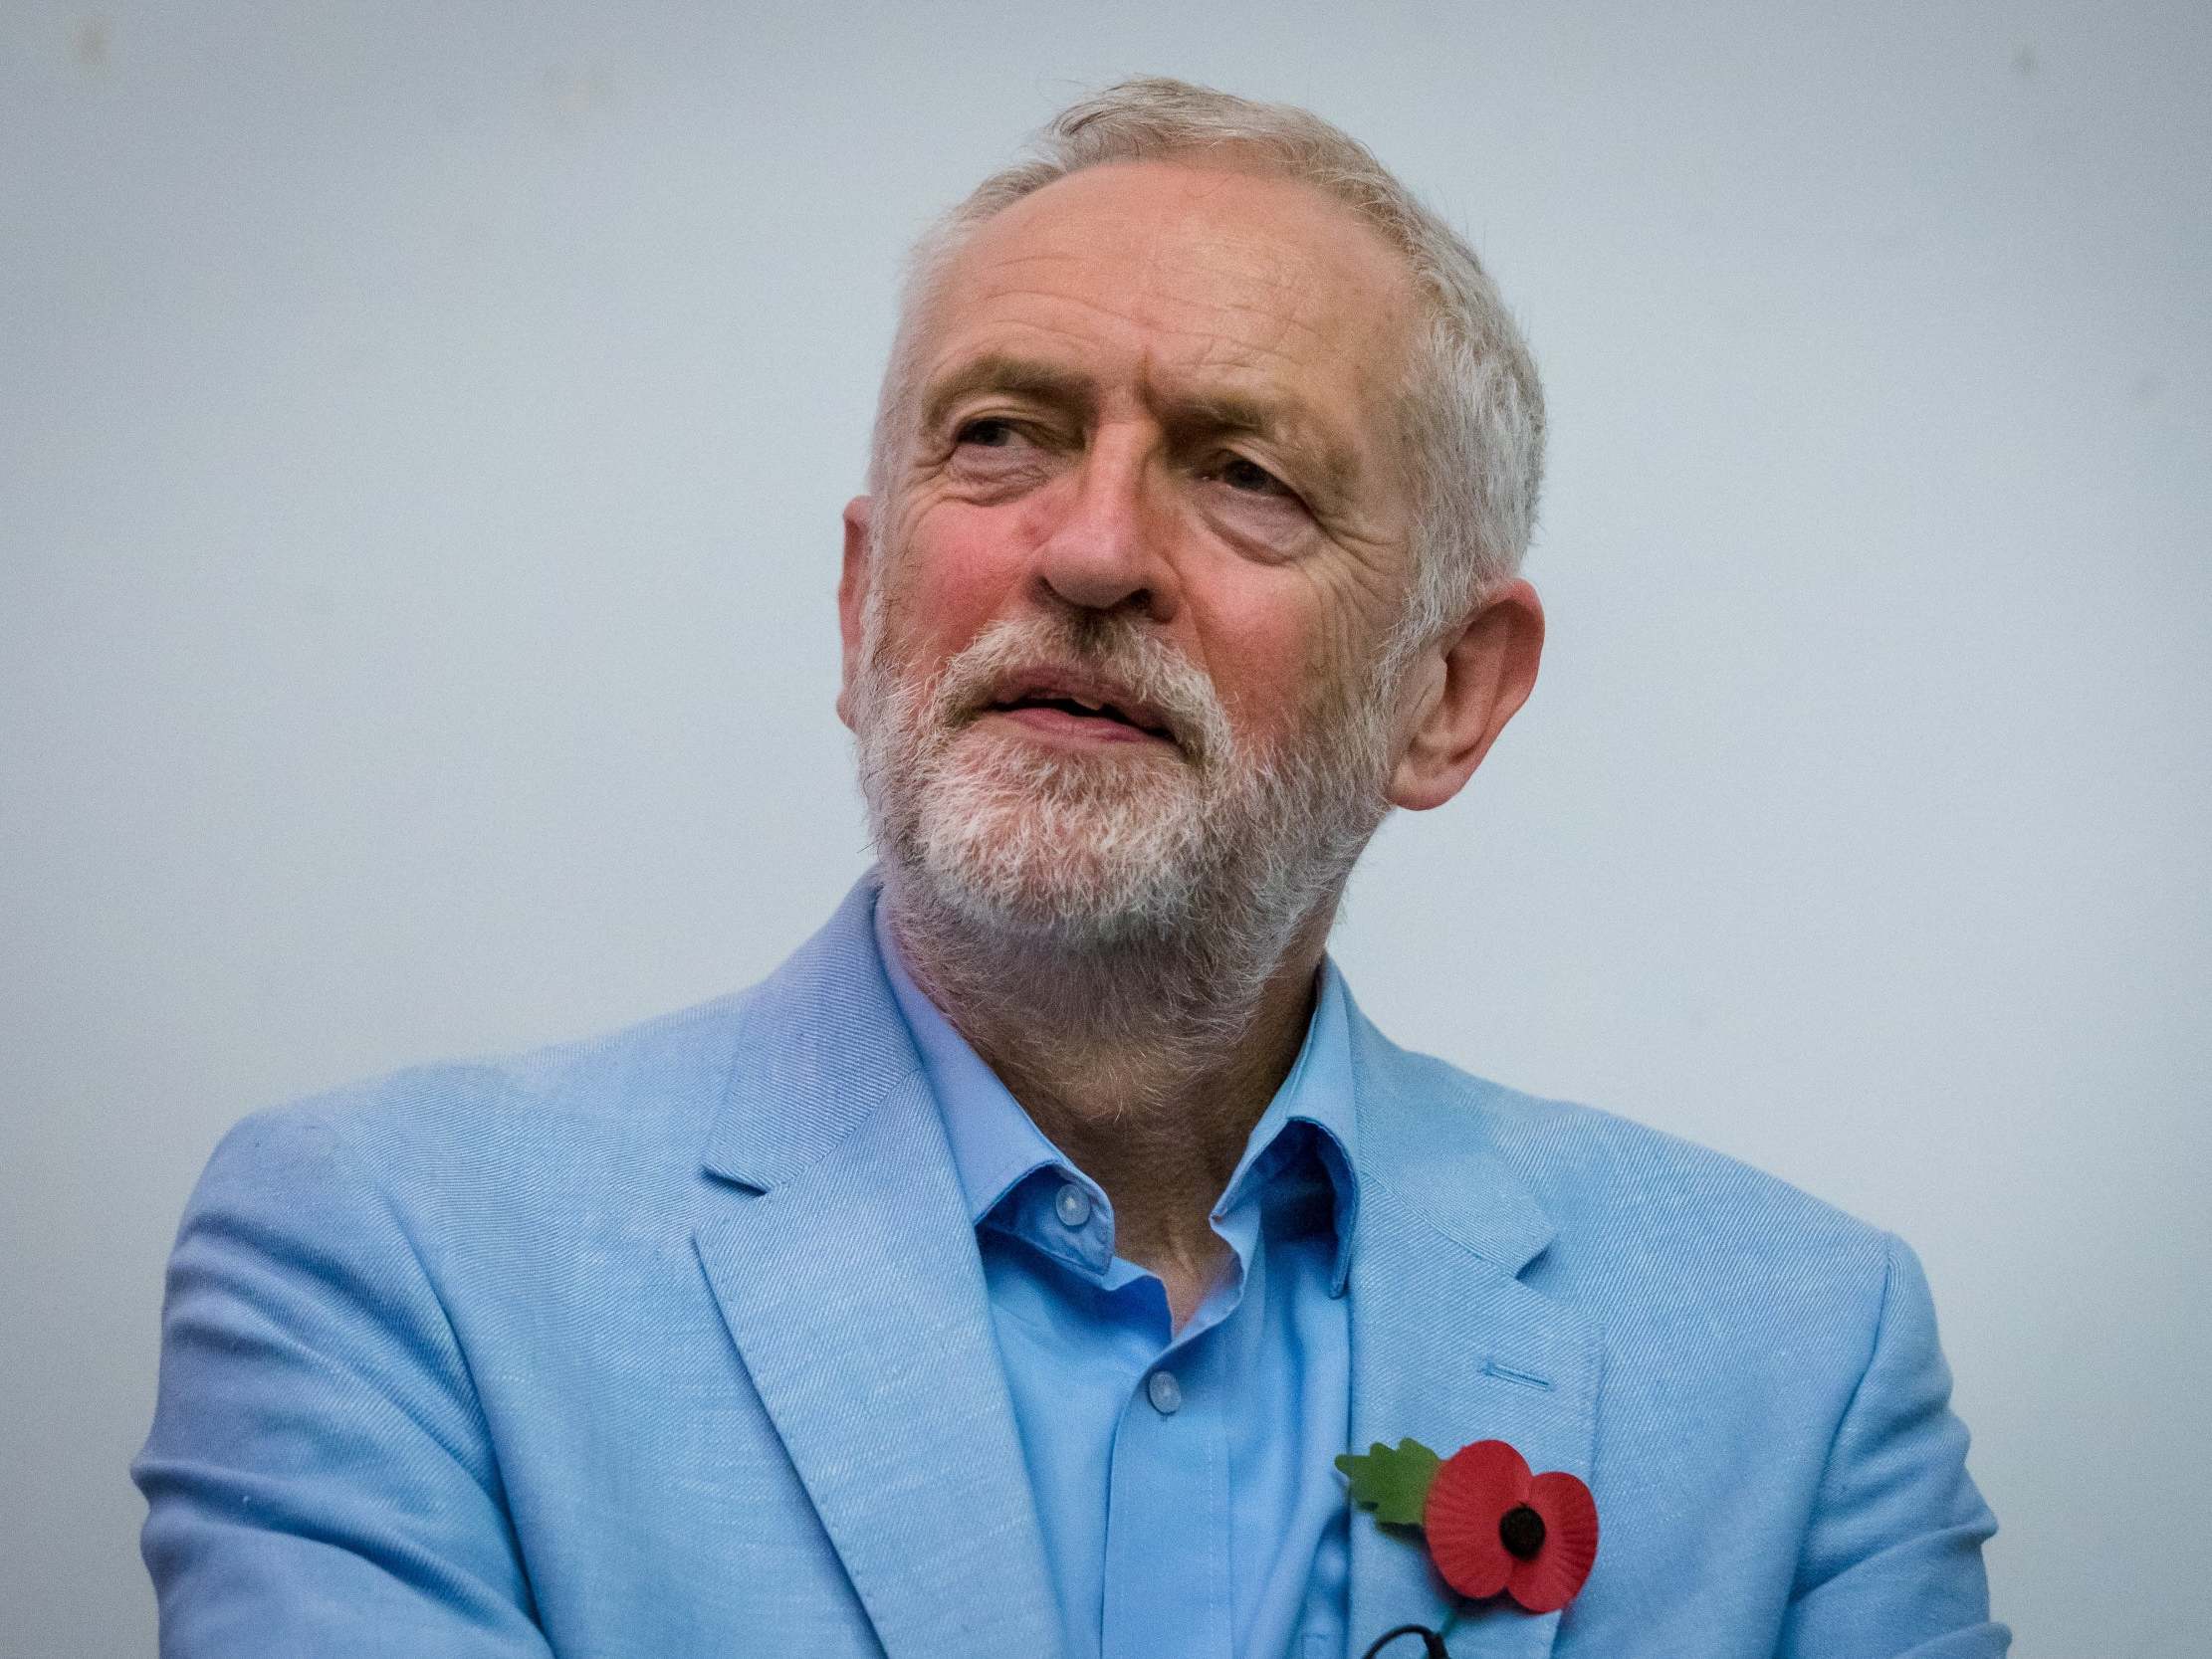 Jeremy Corbyn wants to negotiate a new Brexit deal